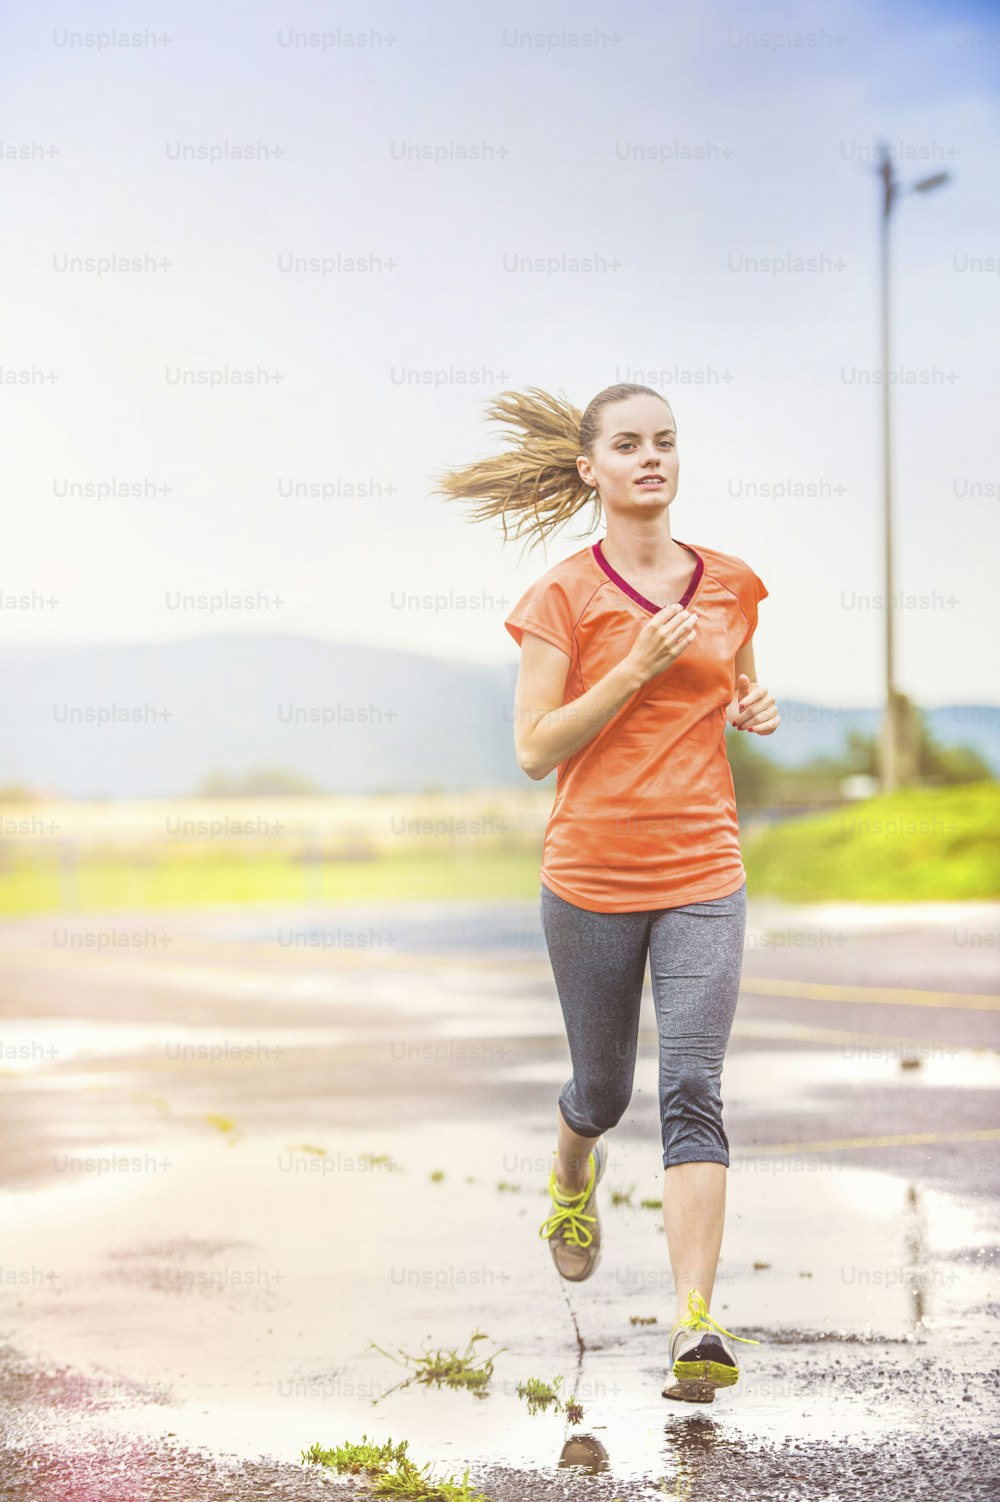 Young woman jogging on asphalt in rainy weather